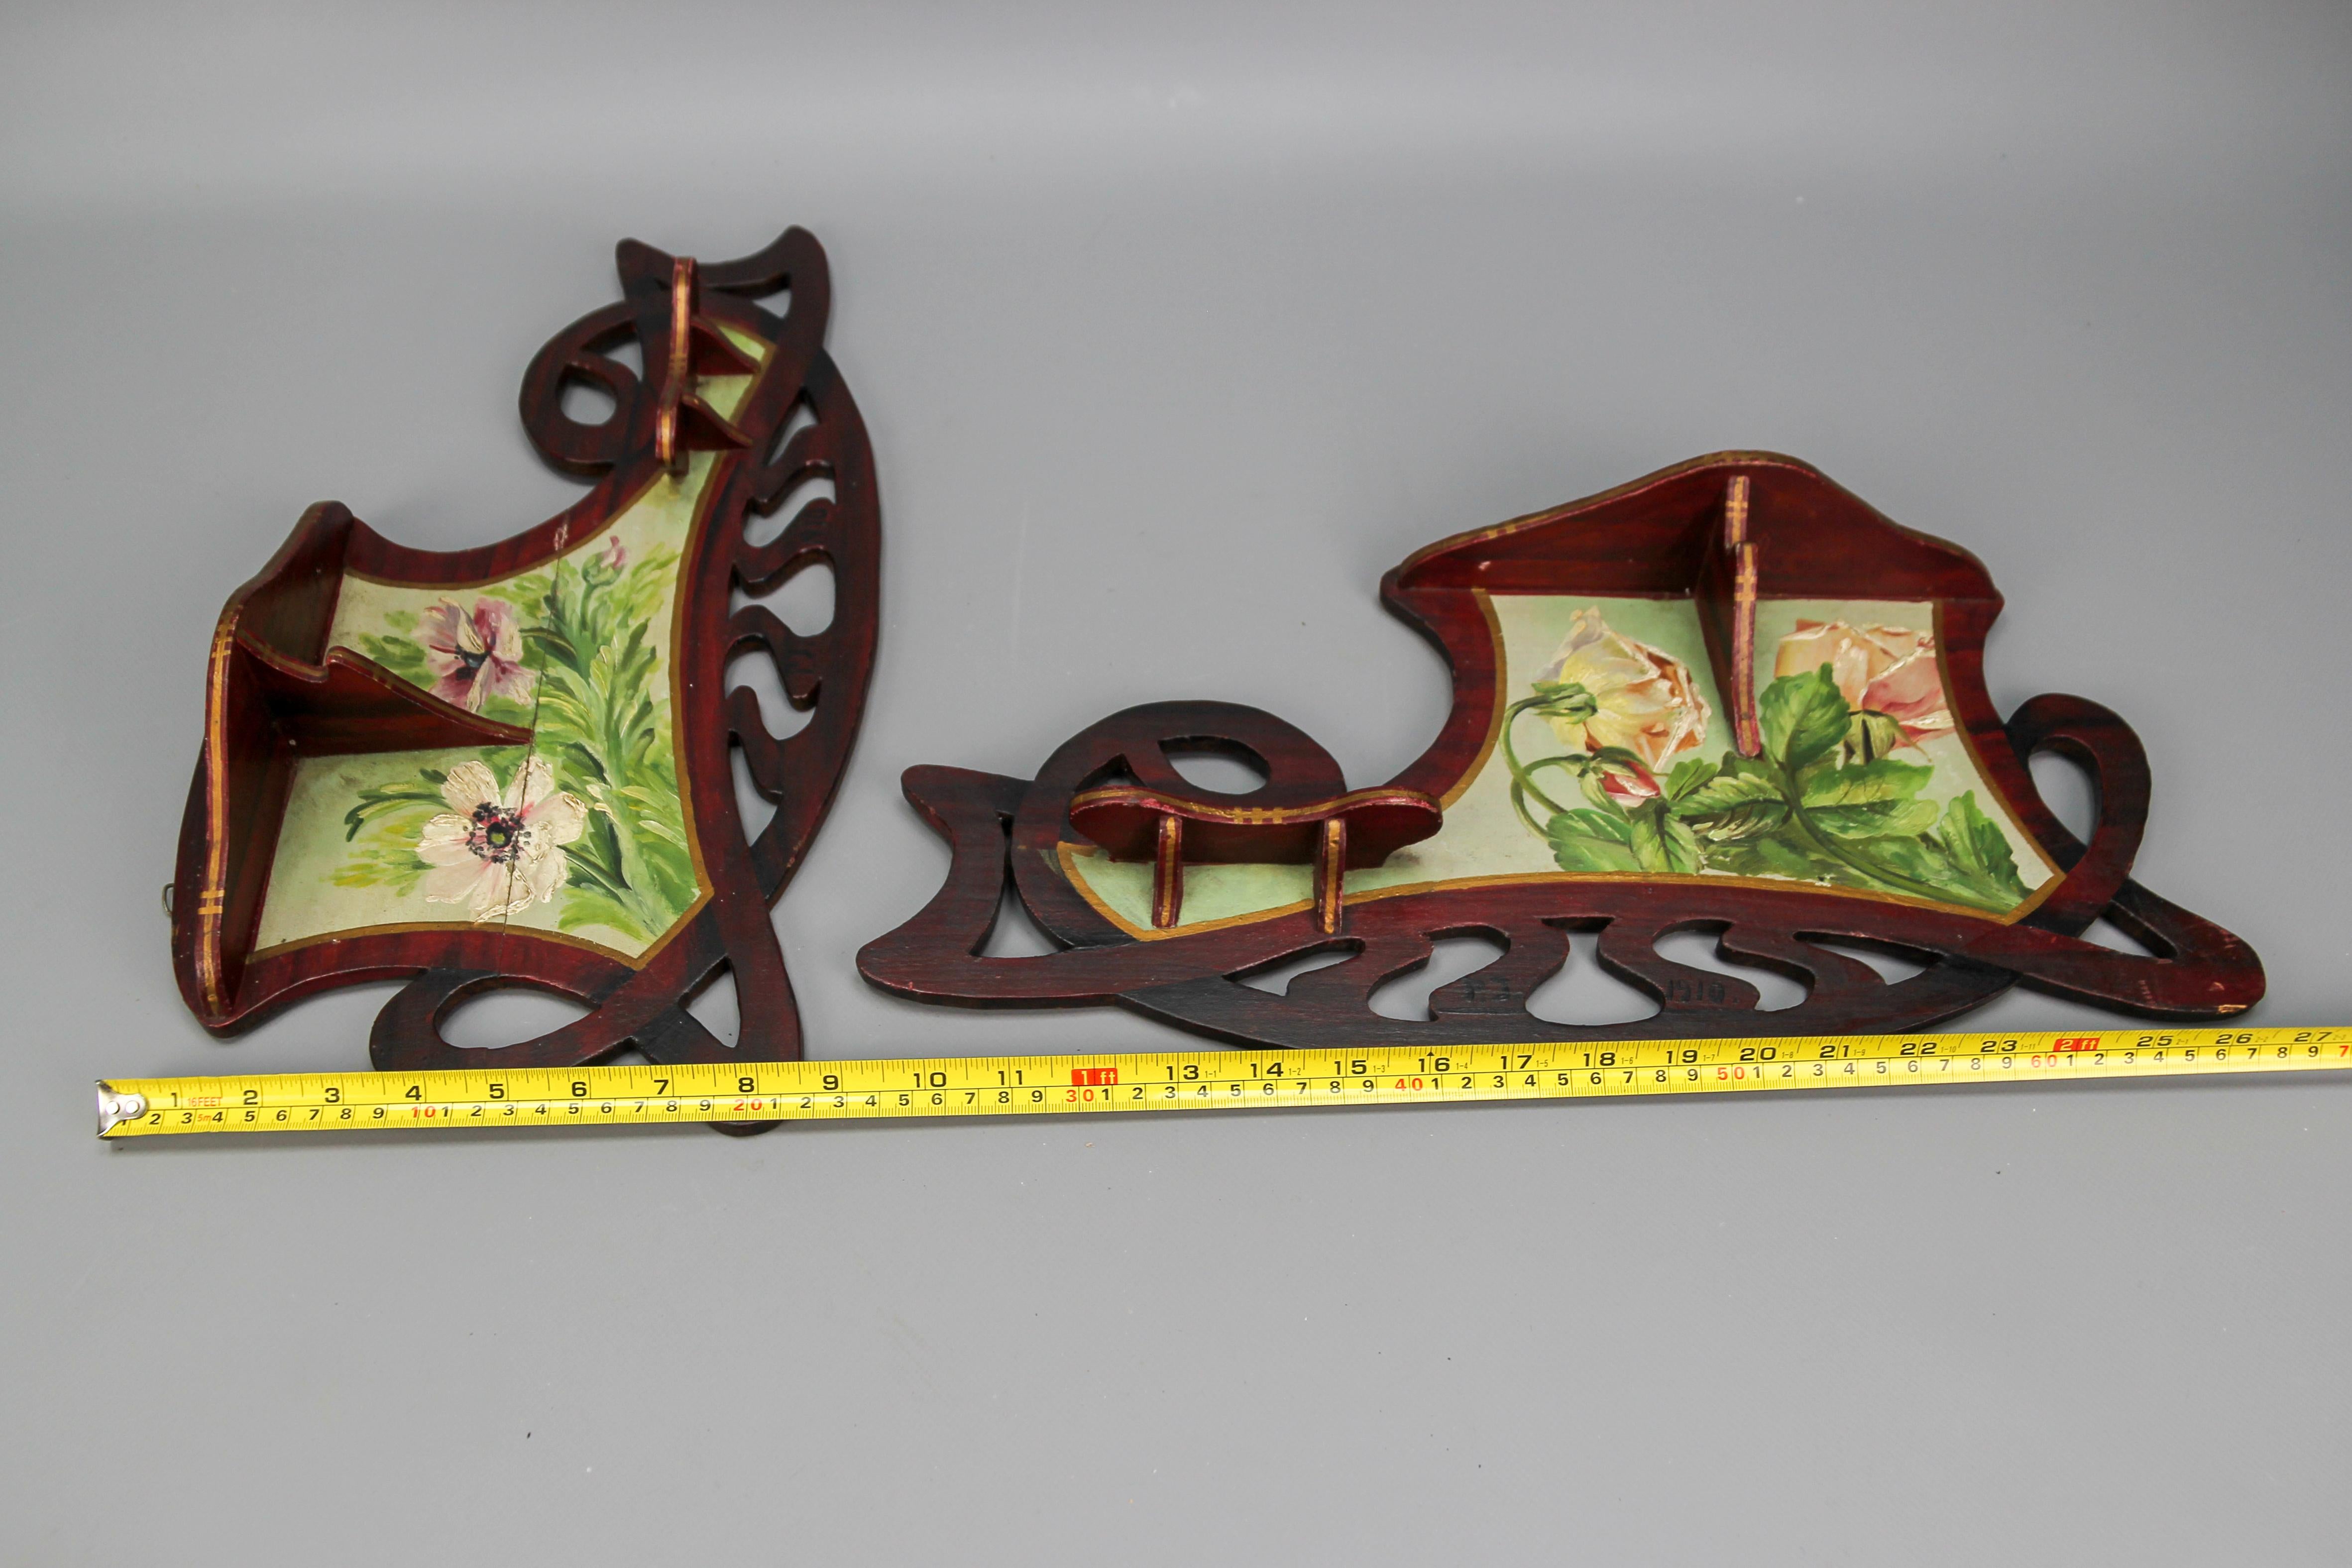 Pair of Art Nouveau Wooden Hand-Painted Floral Shelves, Germany, 1910 For Sale 14